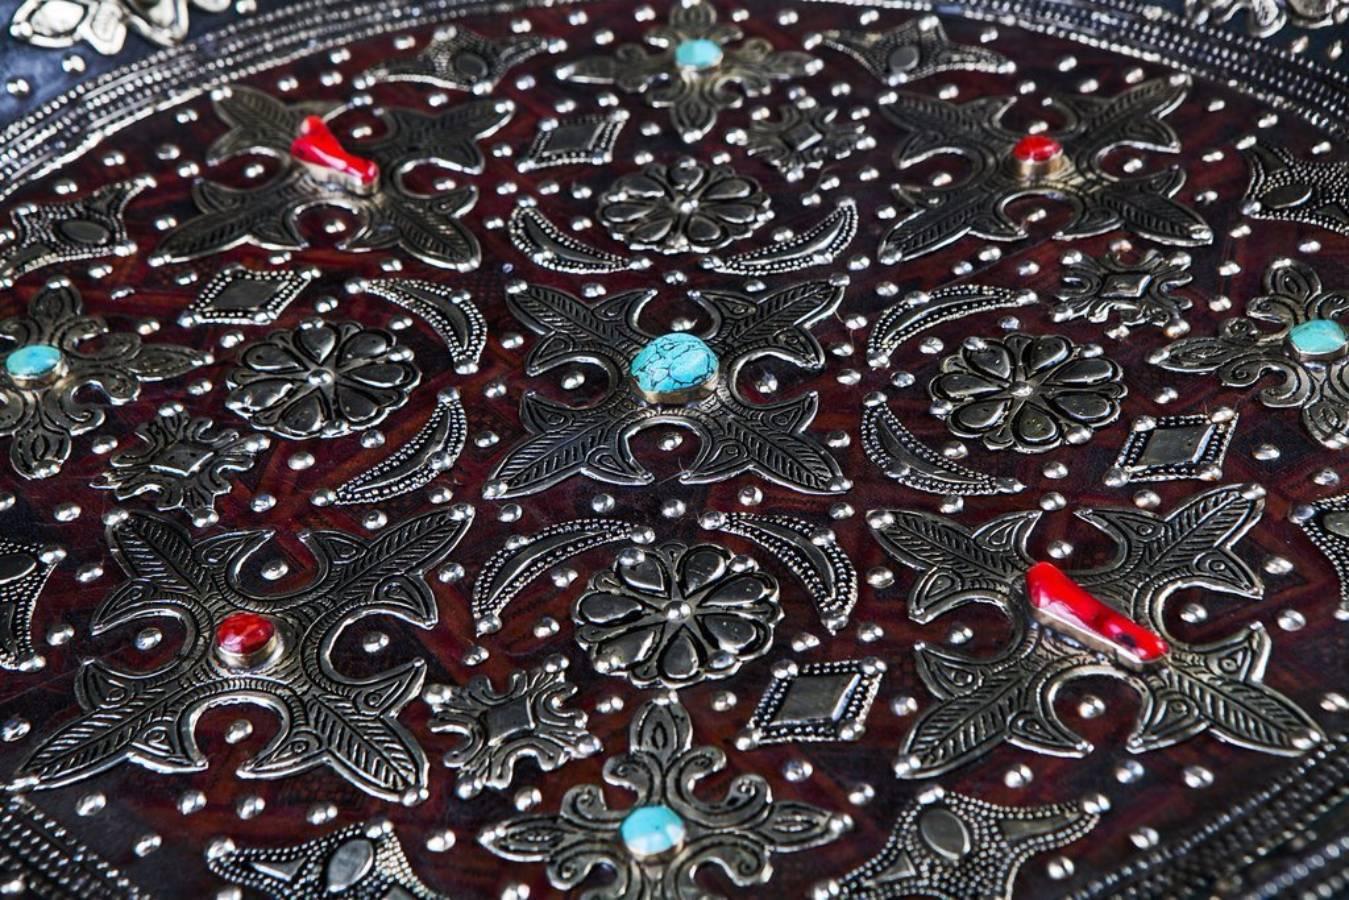 This wall decorative ancient style plate features intense, dazzling geometrical patterns on genuine leather, inlaid silver metal punctuated with painted natural stones and exotically designed arabesque motifs. Beautiful and compelling, this ancient